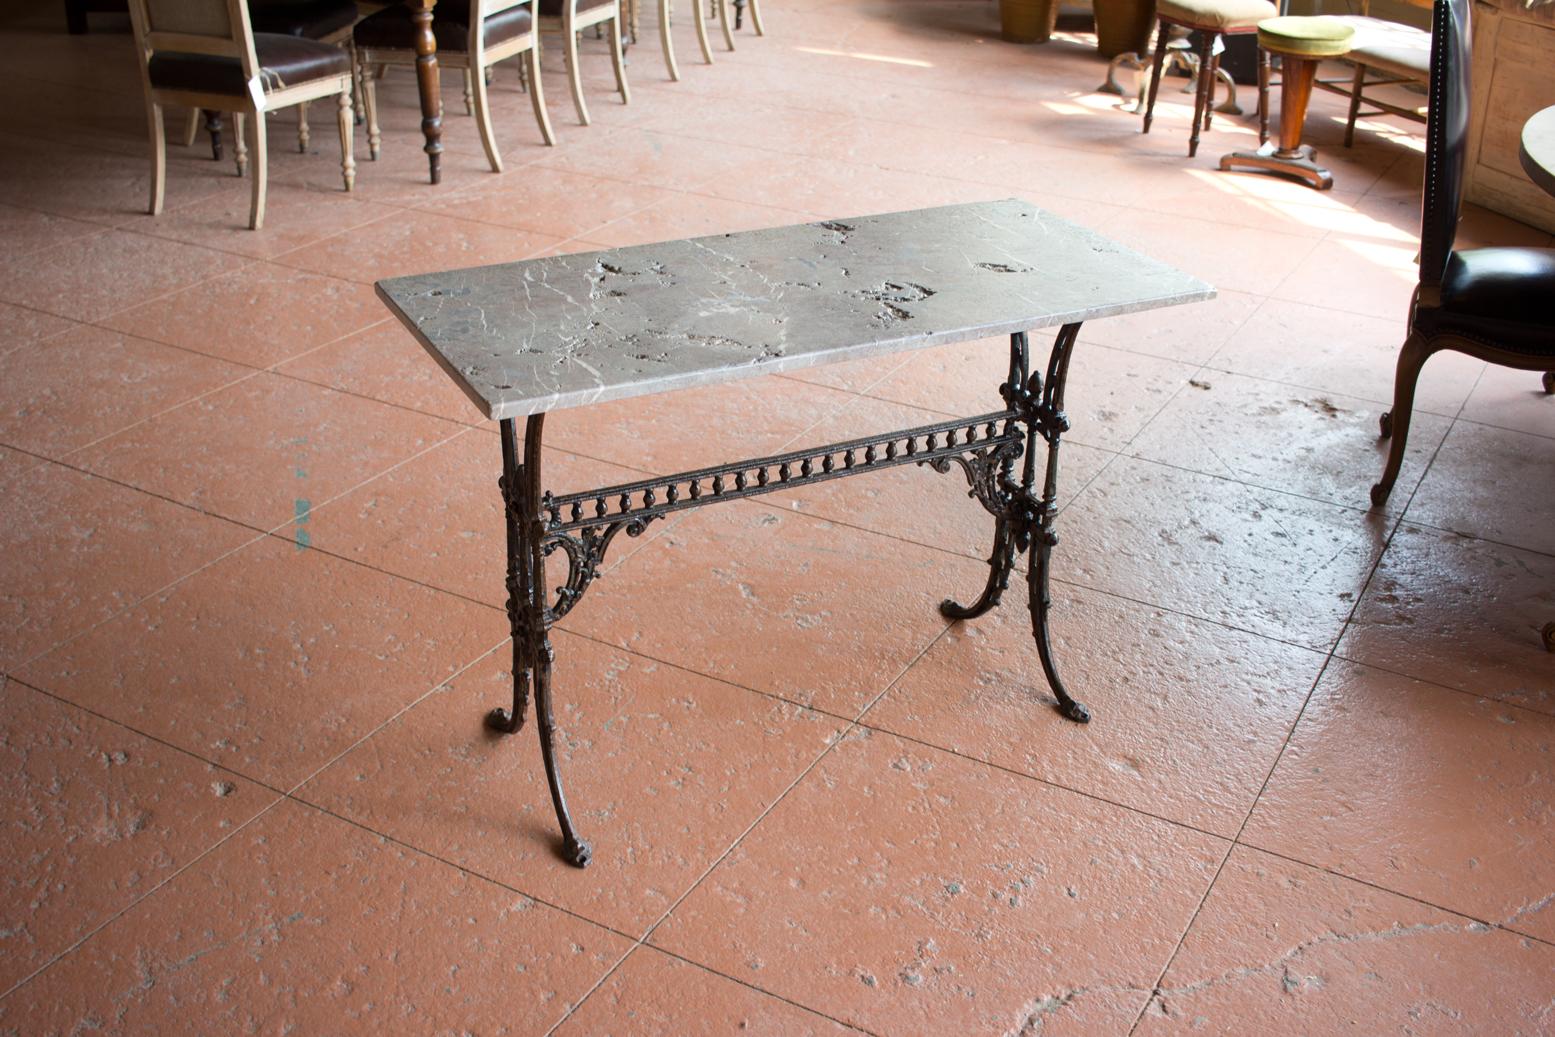 Victorian ornate garden table with wrought iron and topped with a beautiful marble slab with lots of distressing!